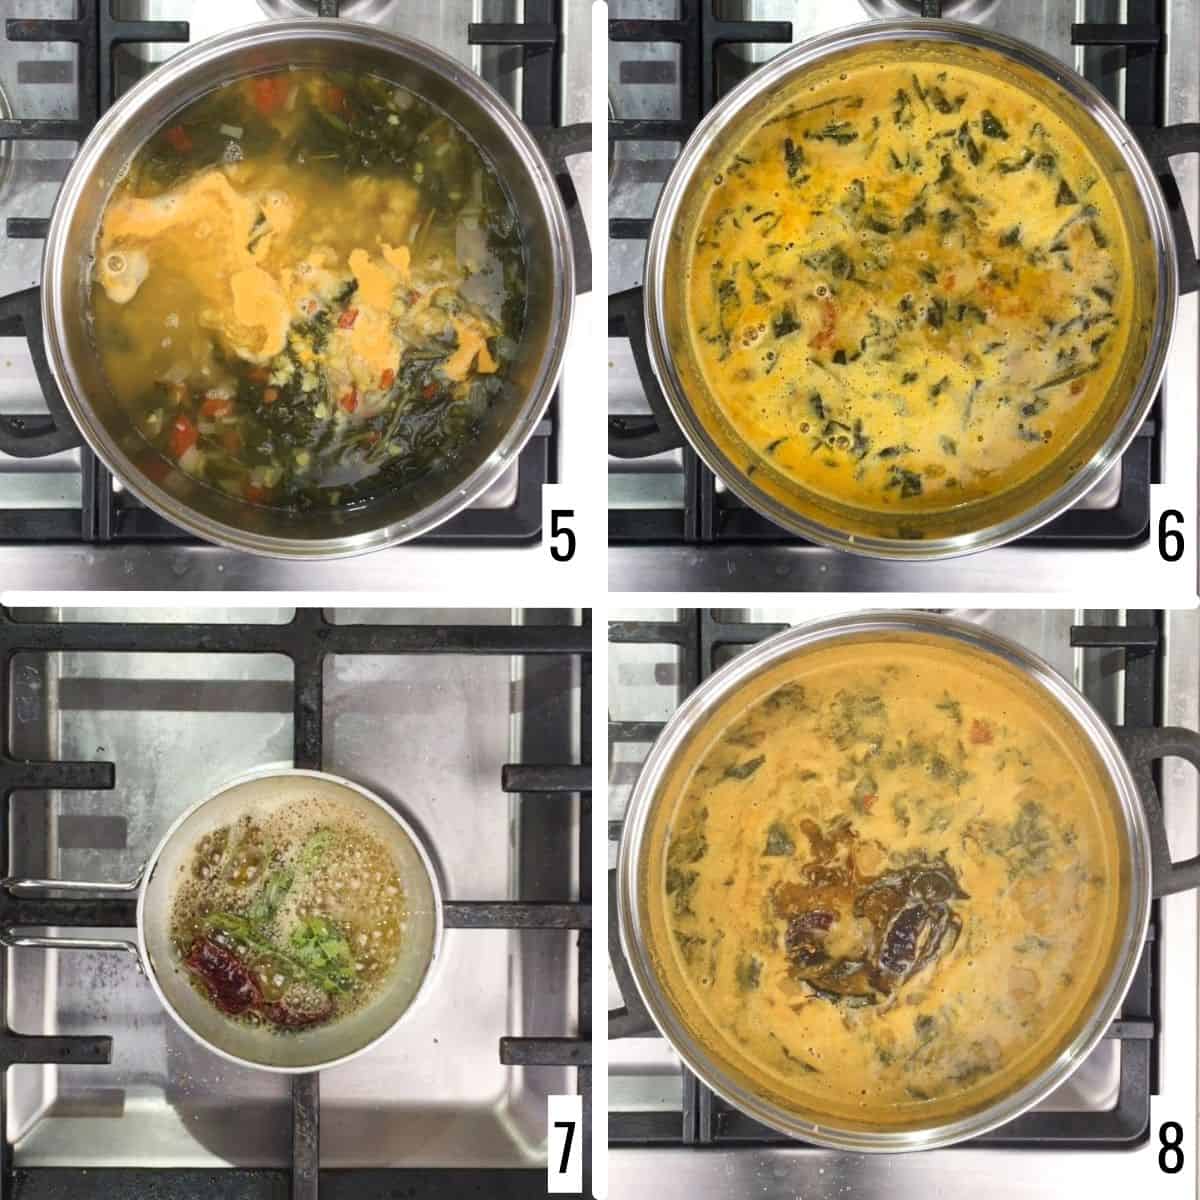 A 4-step collage showing how to make the tempering for the finished dish.